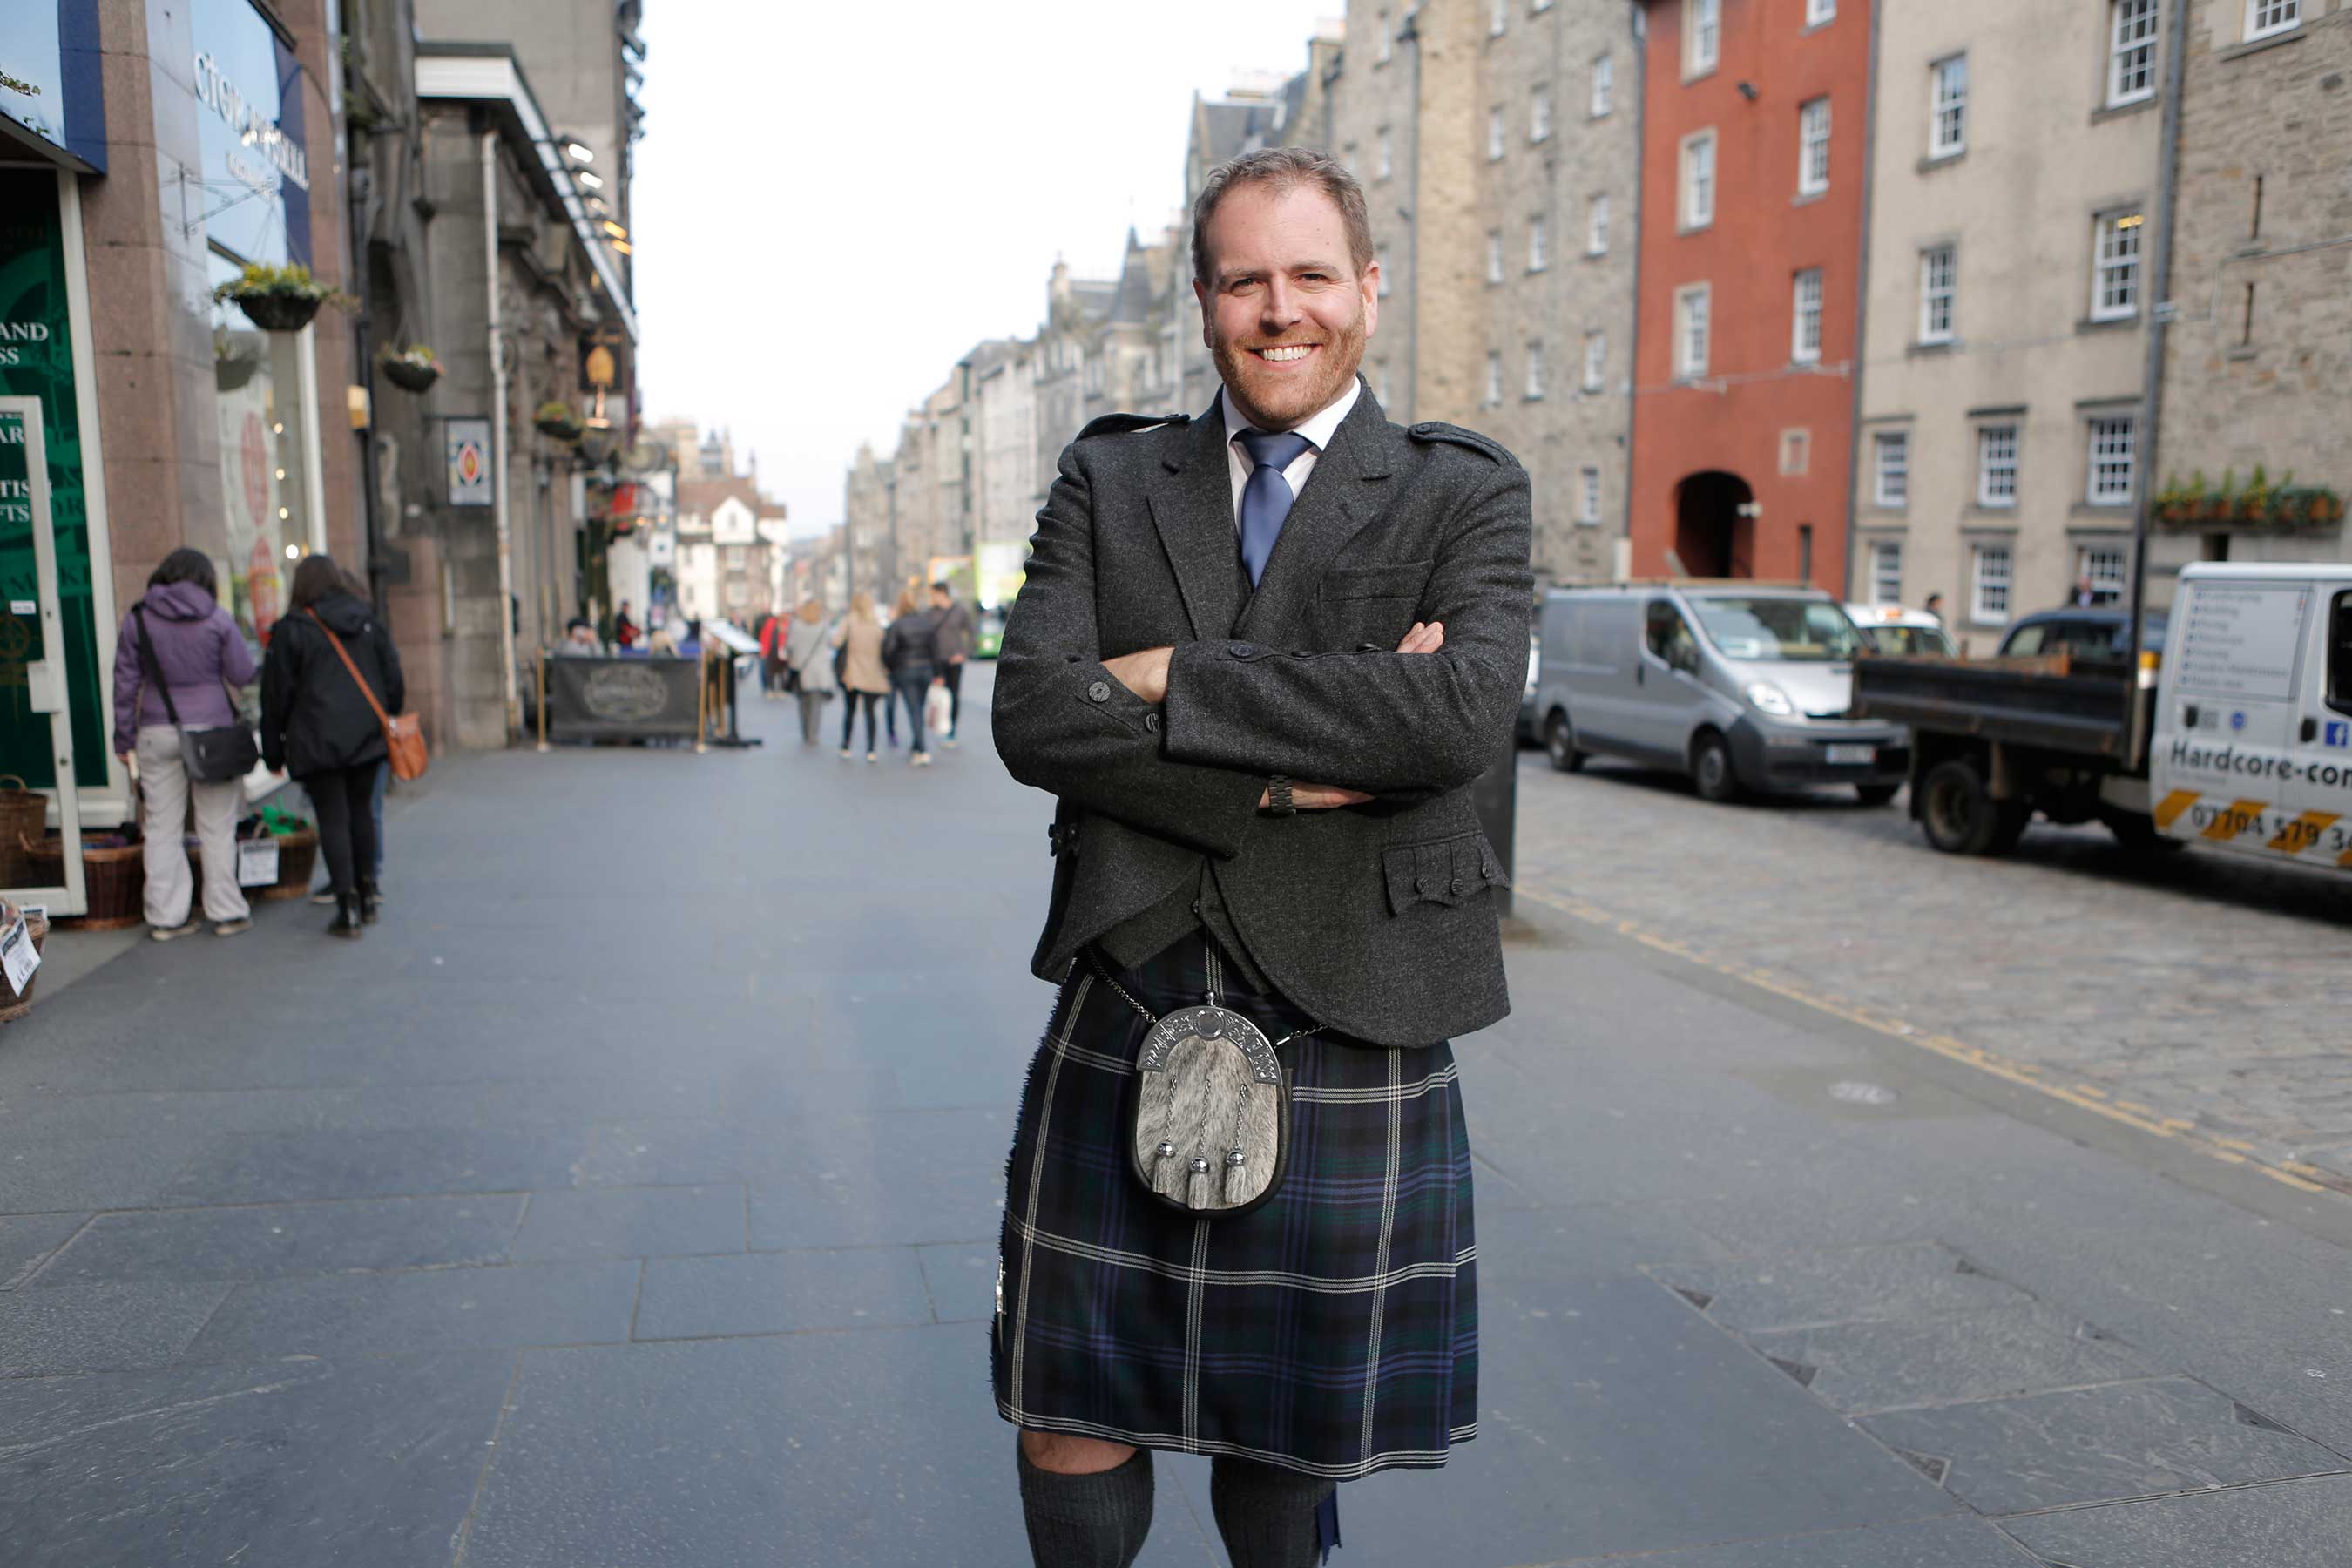 To fully experience the local culture, Josh Gates, host of “Expedition Unknown,” dons a traditional kilt while in Edinburgh, Scotland investigating the legend of King Arthur.